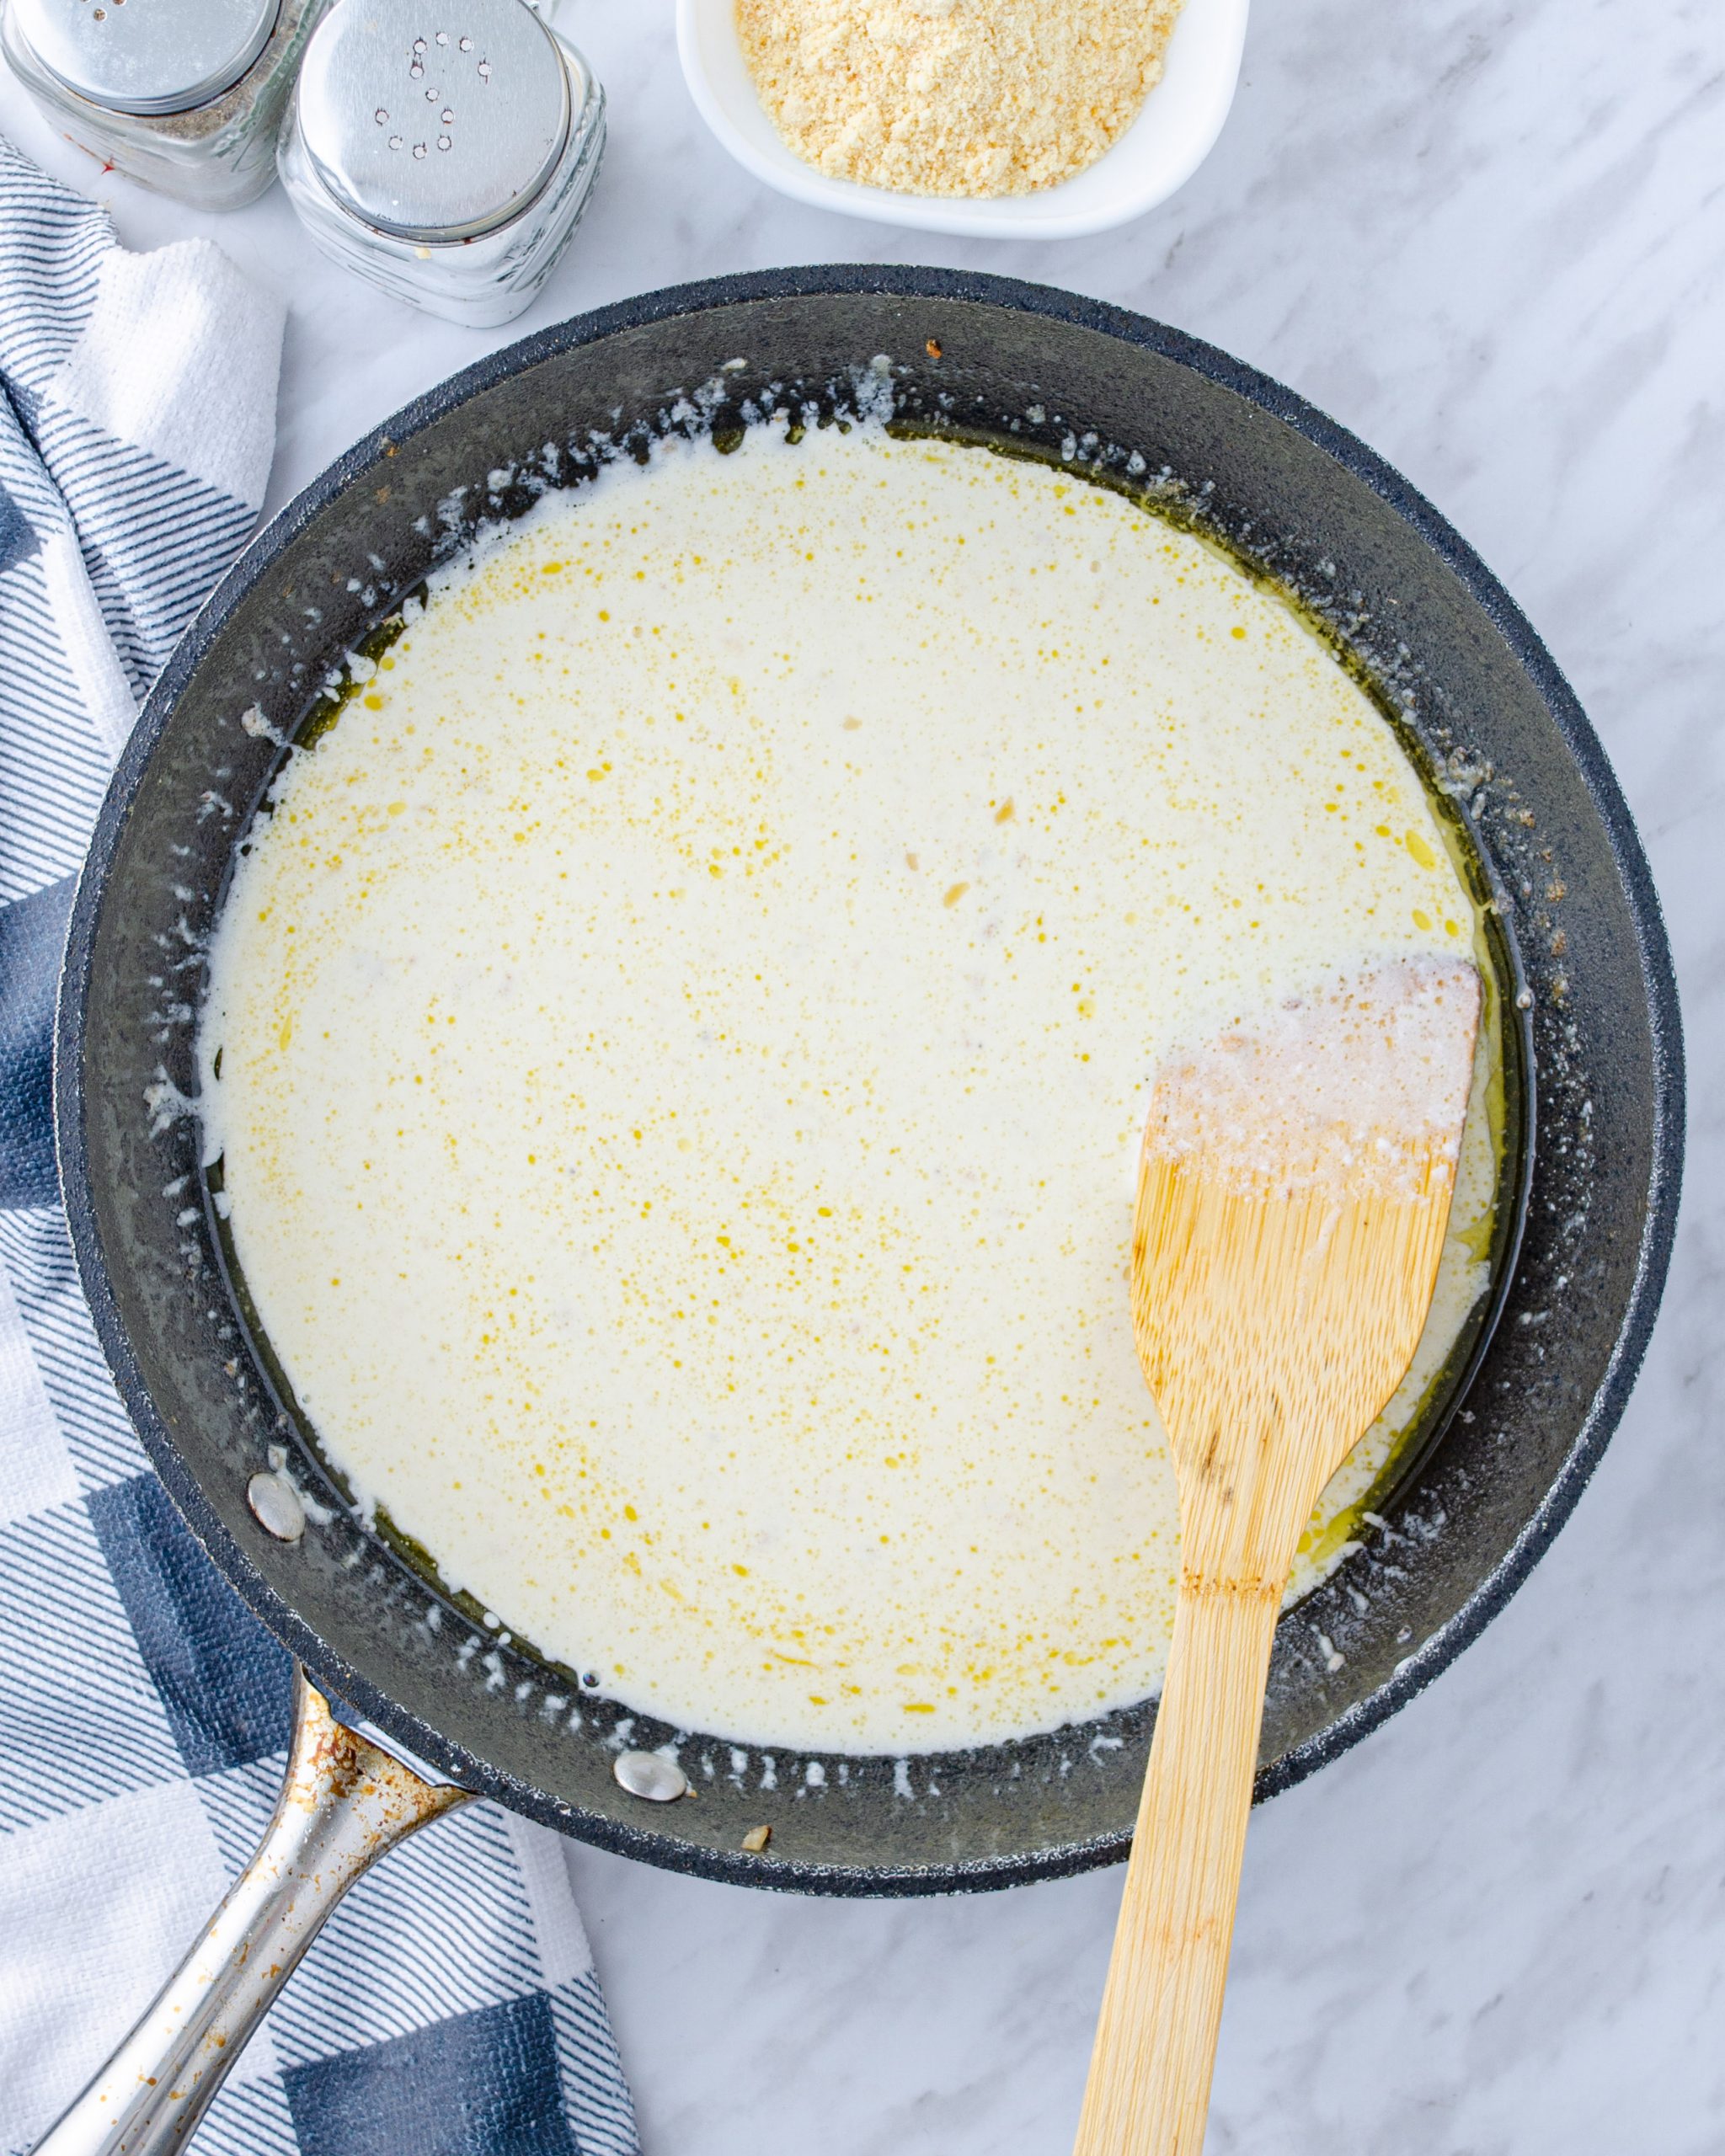 Whisk the heavy whipping cream into the skillet and simmer until the sauce has thickened.